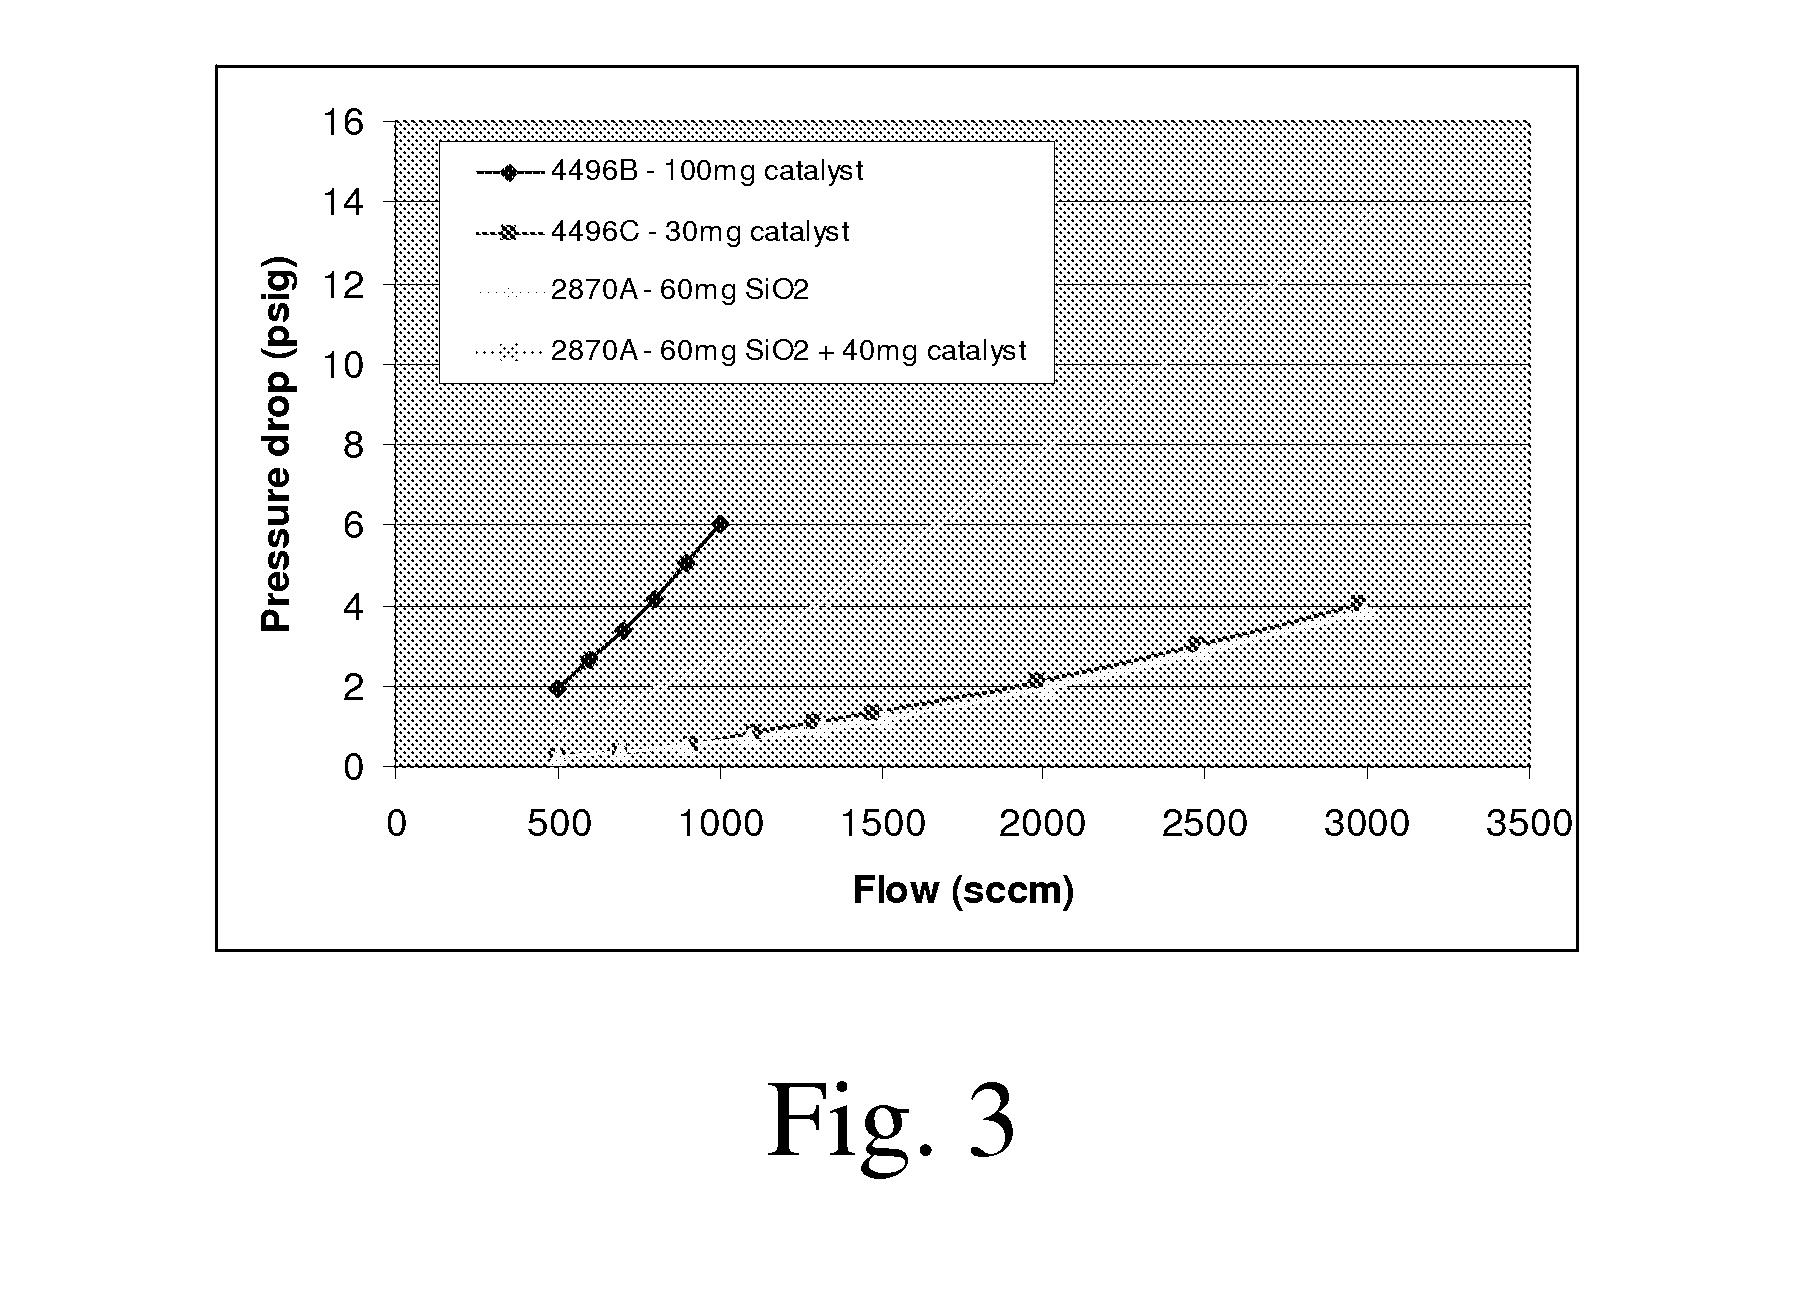 Microchannel Apparatus Comprising Structured Walls, Chemical Processes, Methods of Making Formaldehyde